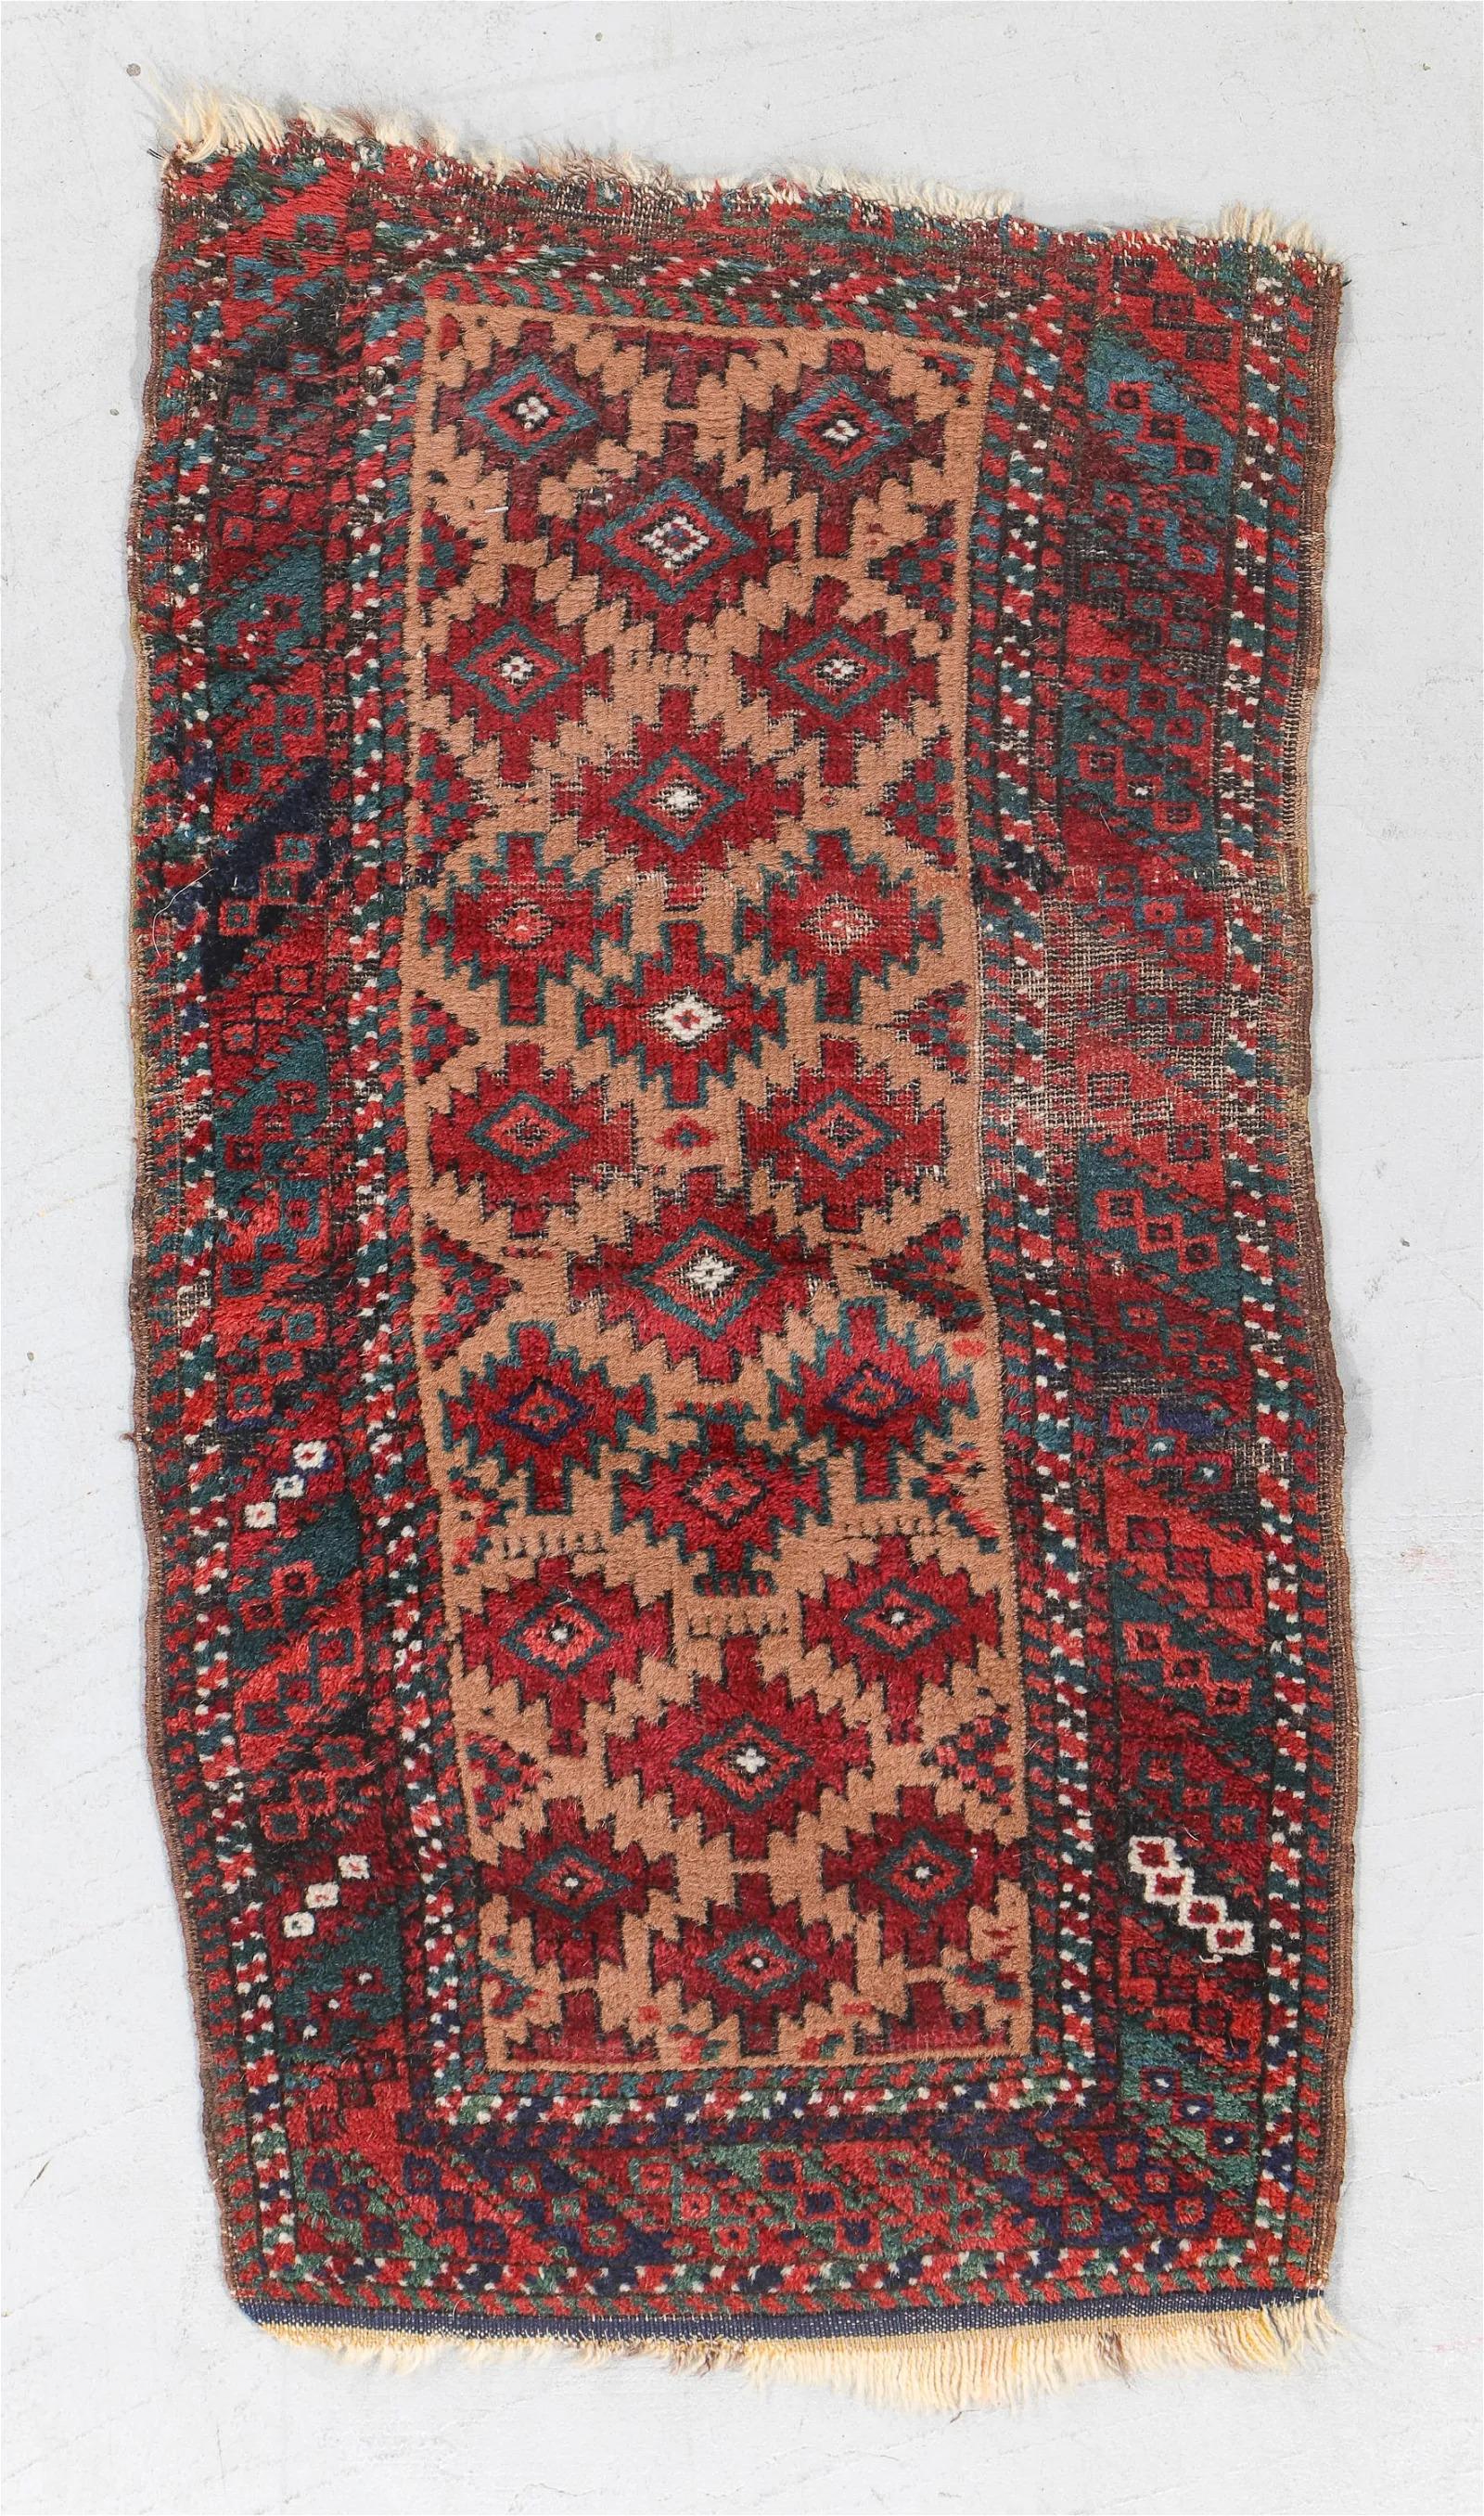 Lot of 9 Antique Afghan Baluch Collectible Rugs 1.6' x 3.2', 1870s - 2B29 In Good Condition For Sale In Bordeaux, FR